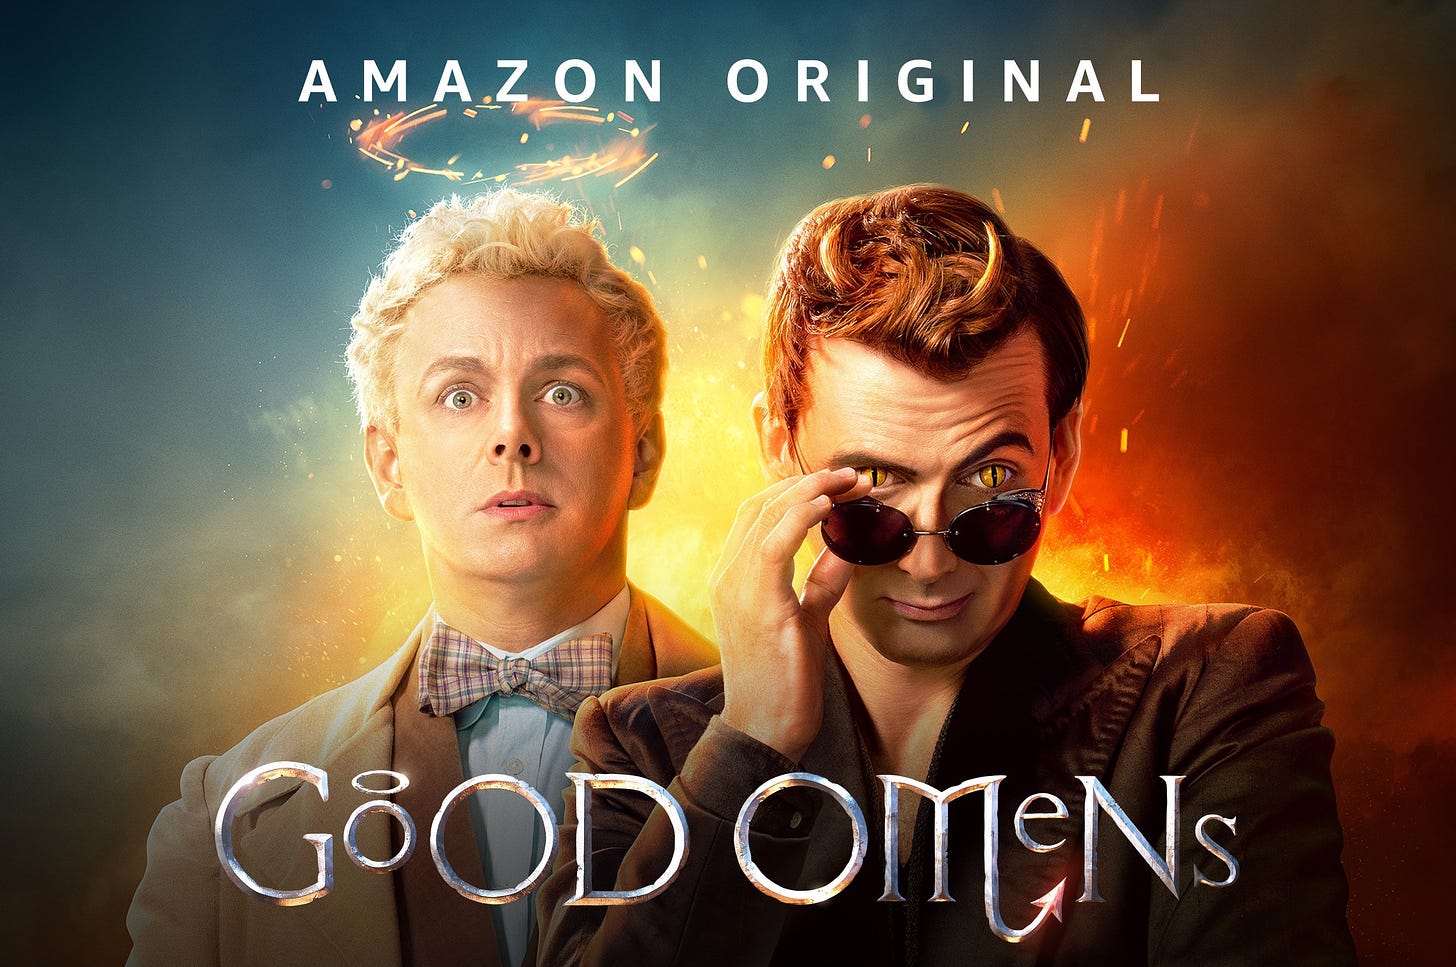 Good Omens starring David Tennant and Michael Sheen. Click here to check it out.